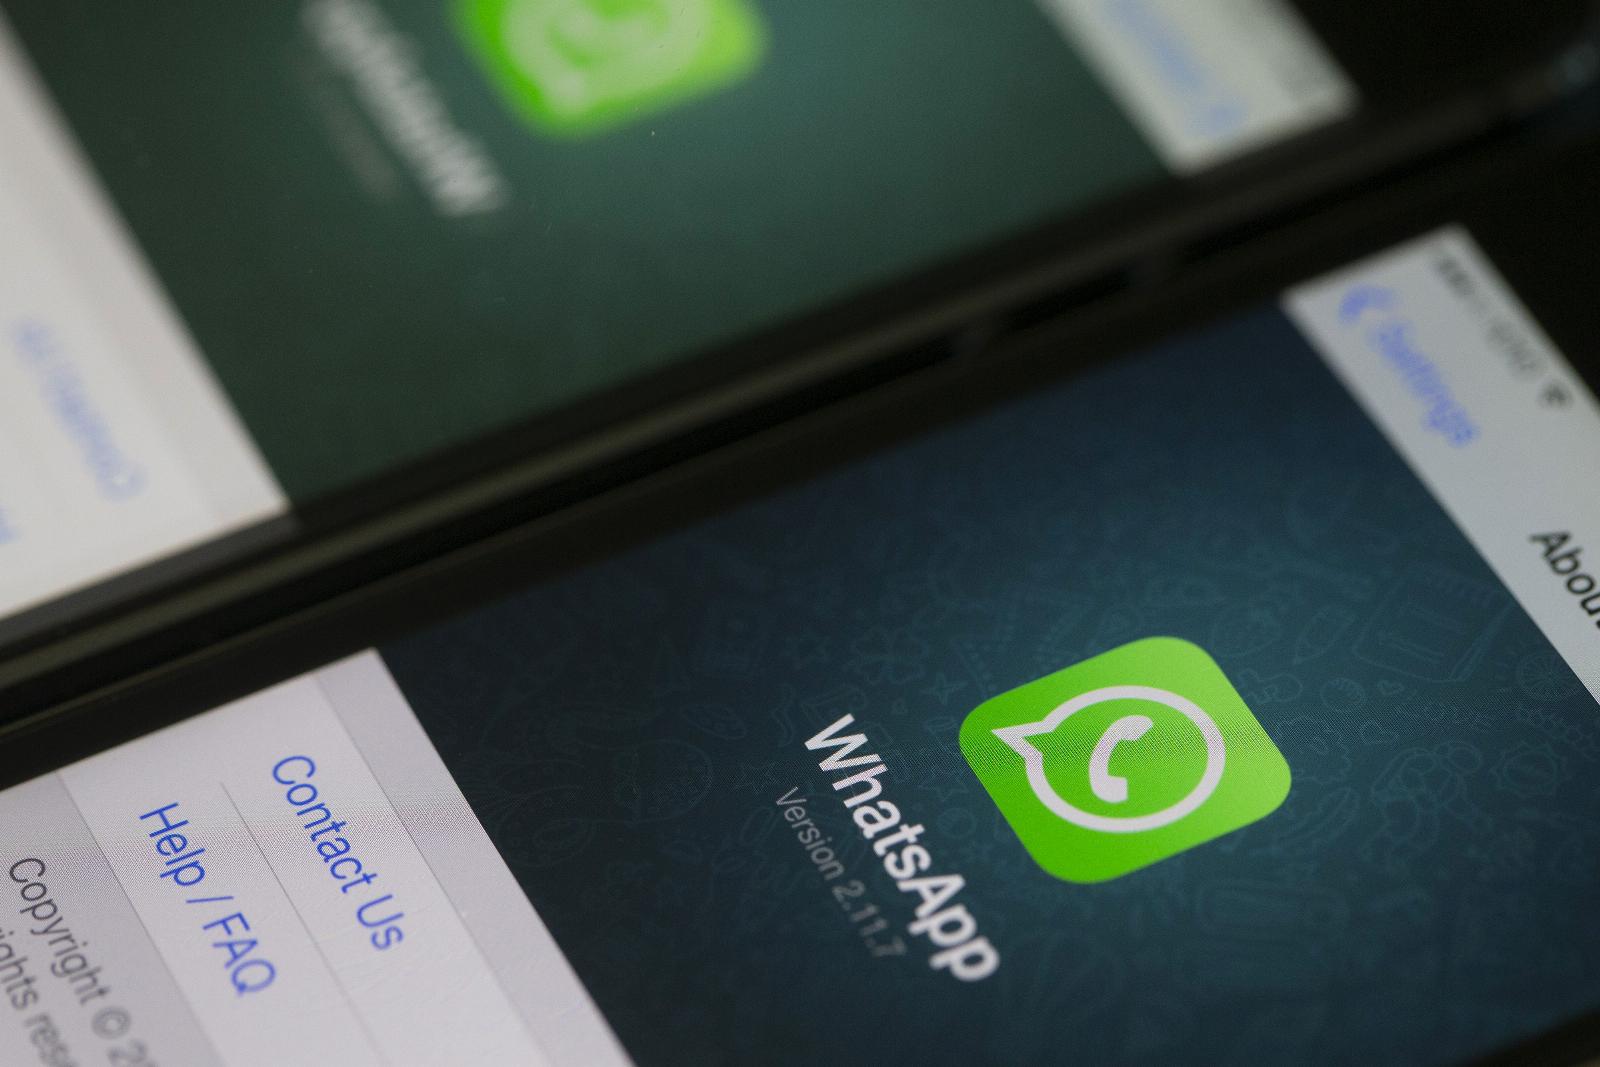 WhatsApp Business is changing its rates for messages as it aims to reduce marketing spam